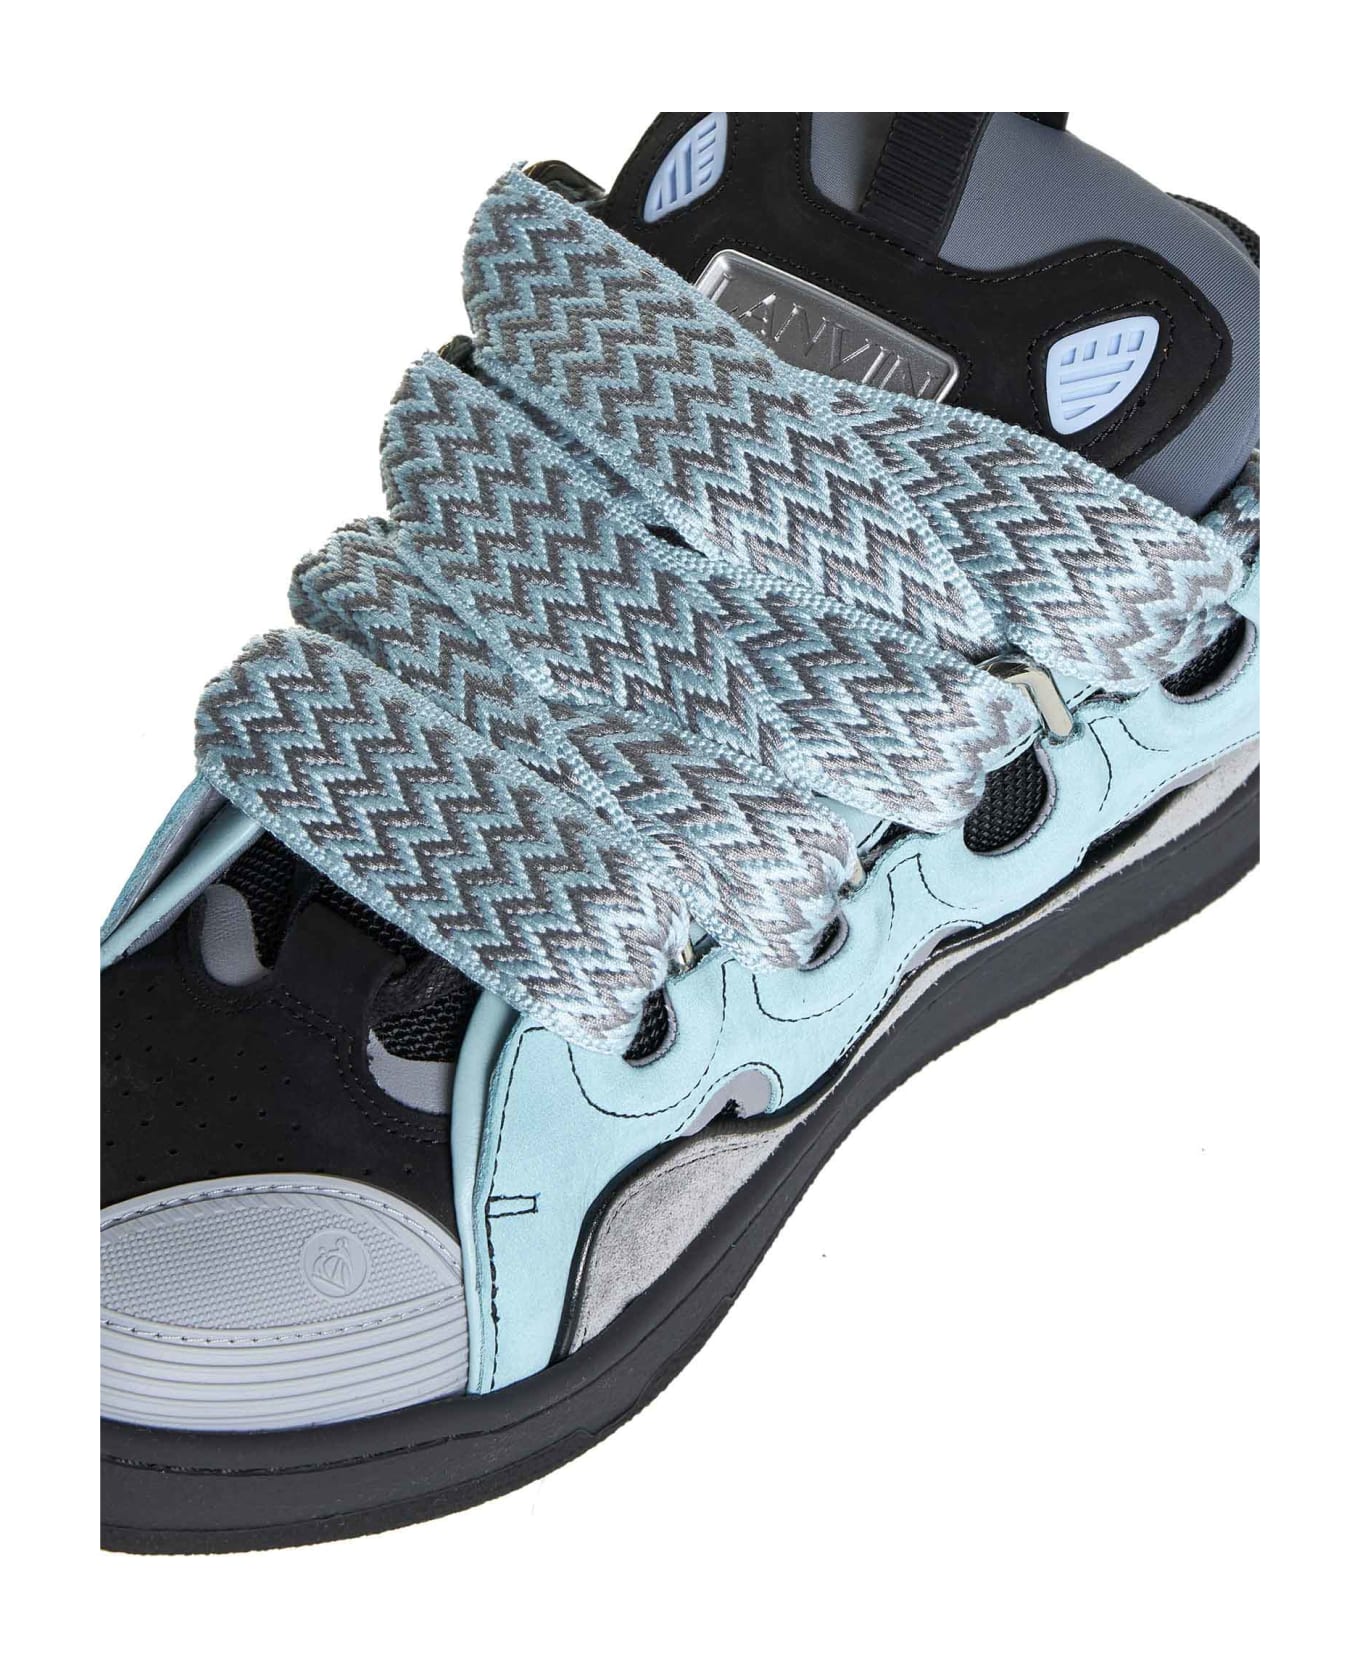 Lanvin Sneakers - Light blue/anthracite